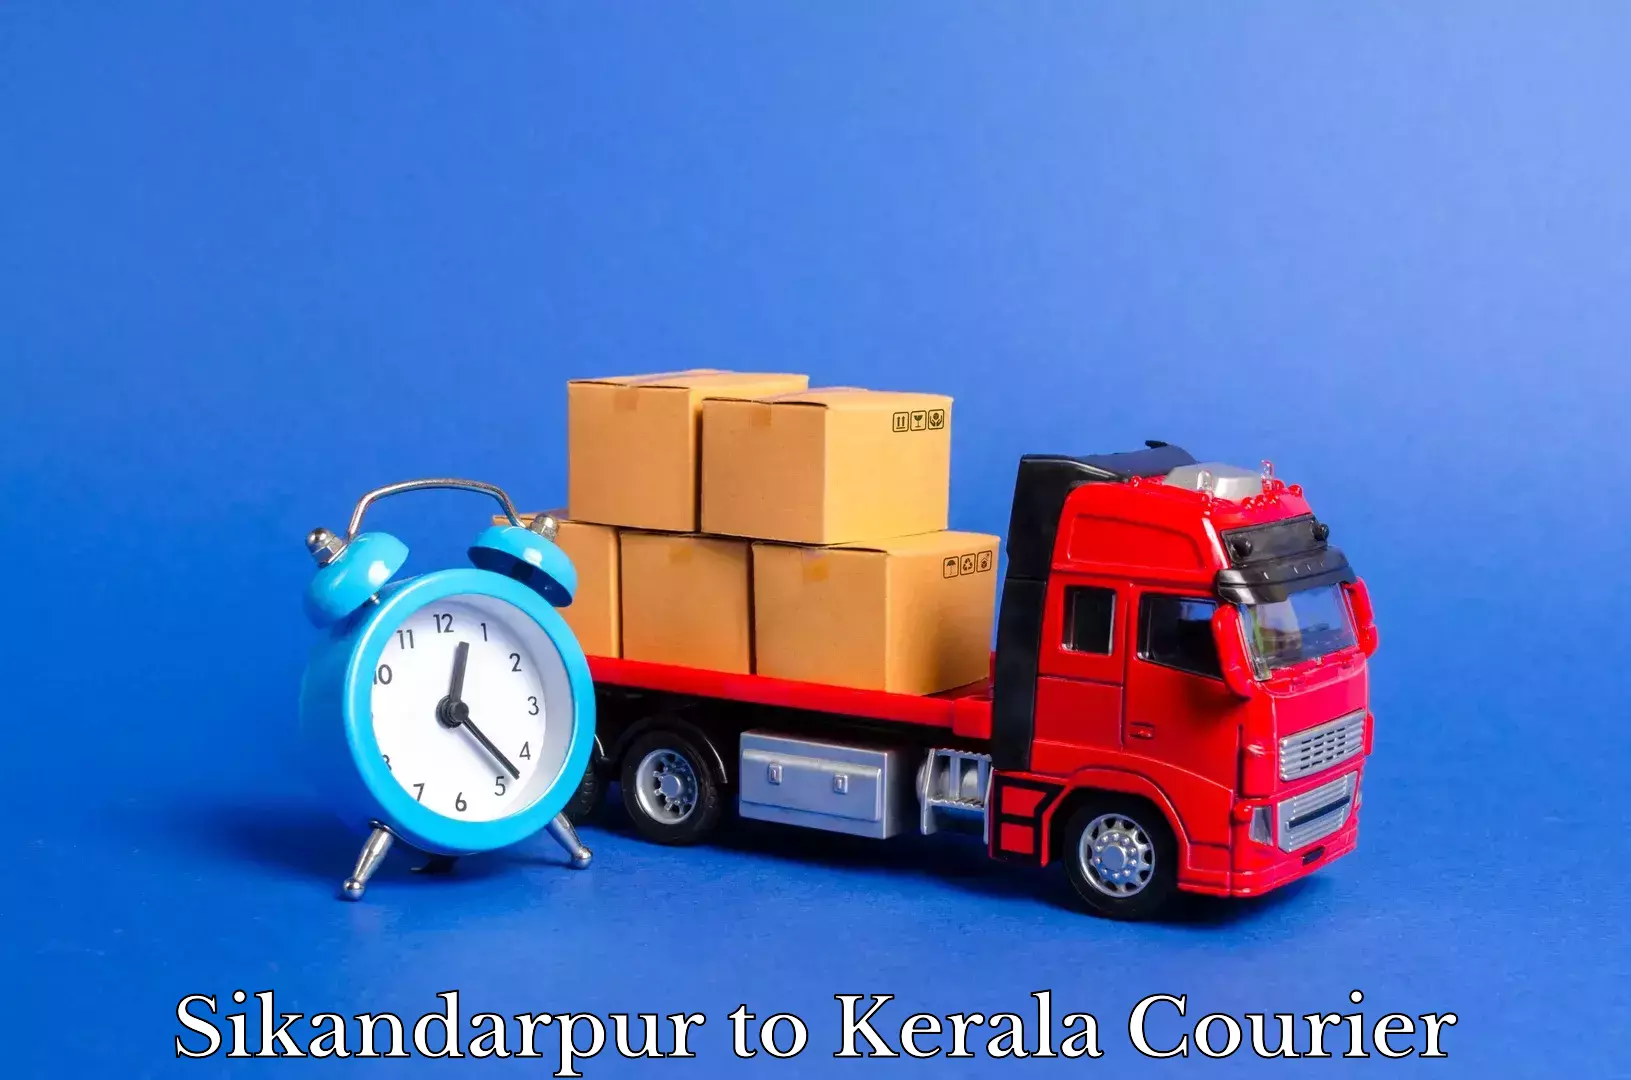 Furniture delivery service in Sikandarpur to Kerala